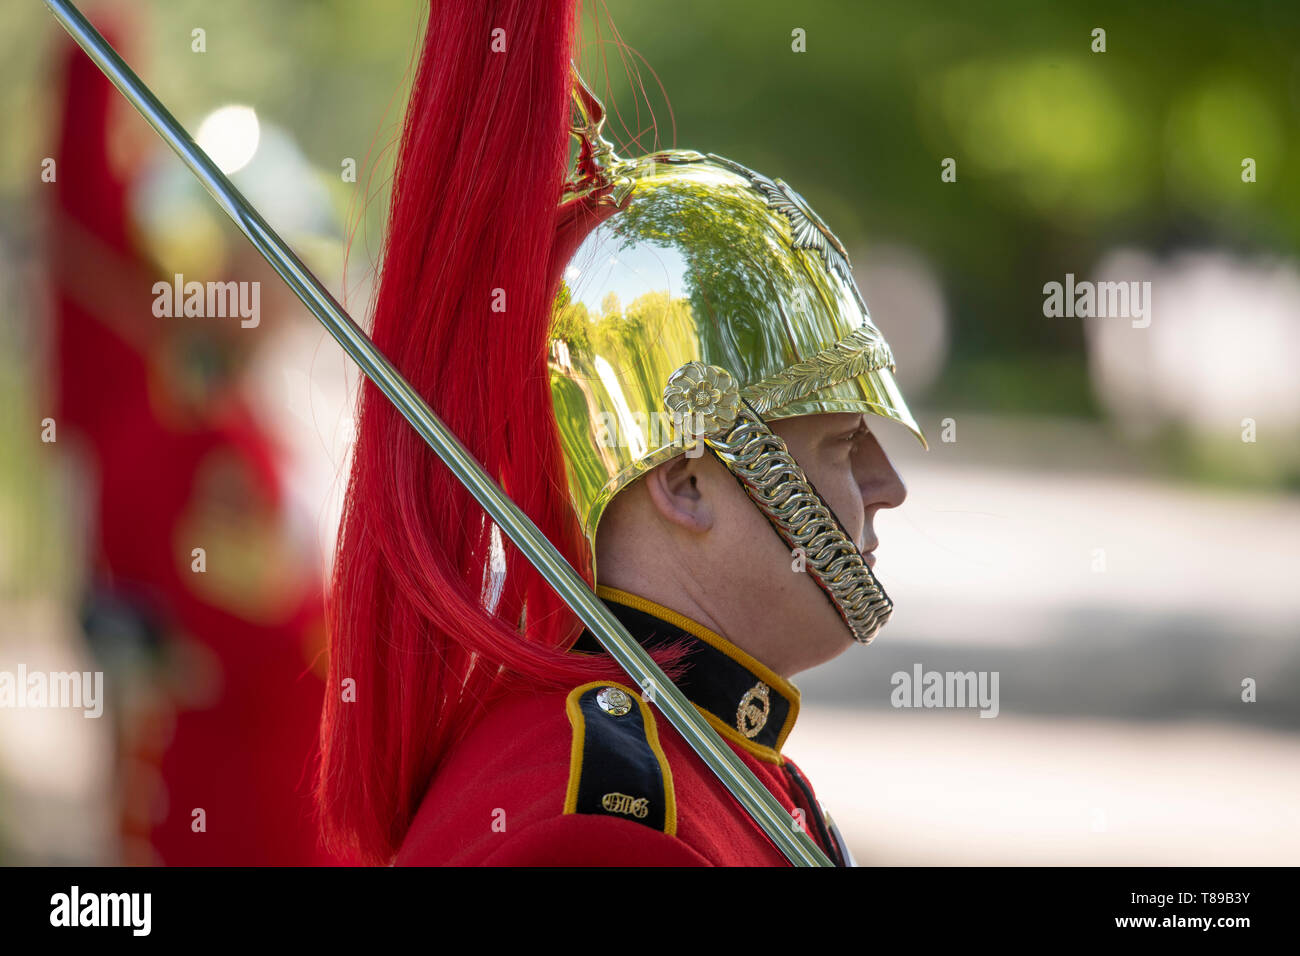 Hyde Park London, UK. 12th May 2019. The Combined Cavalry Old Comrades Association 95th annual parade and service. The parade is commanded by Lieutenant-General Sir Simon Mayall, KCB, CB, Colonel of 1st The Queens Dragoon Guards who are the sponsor regiment of this year’s event. Credit: Malcolm Park/Alamy Live News. Stock Photo